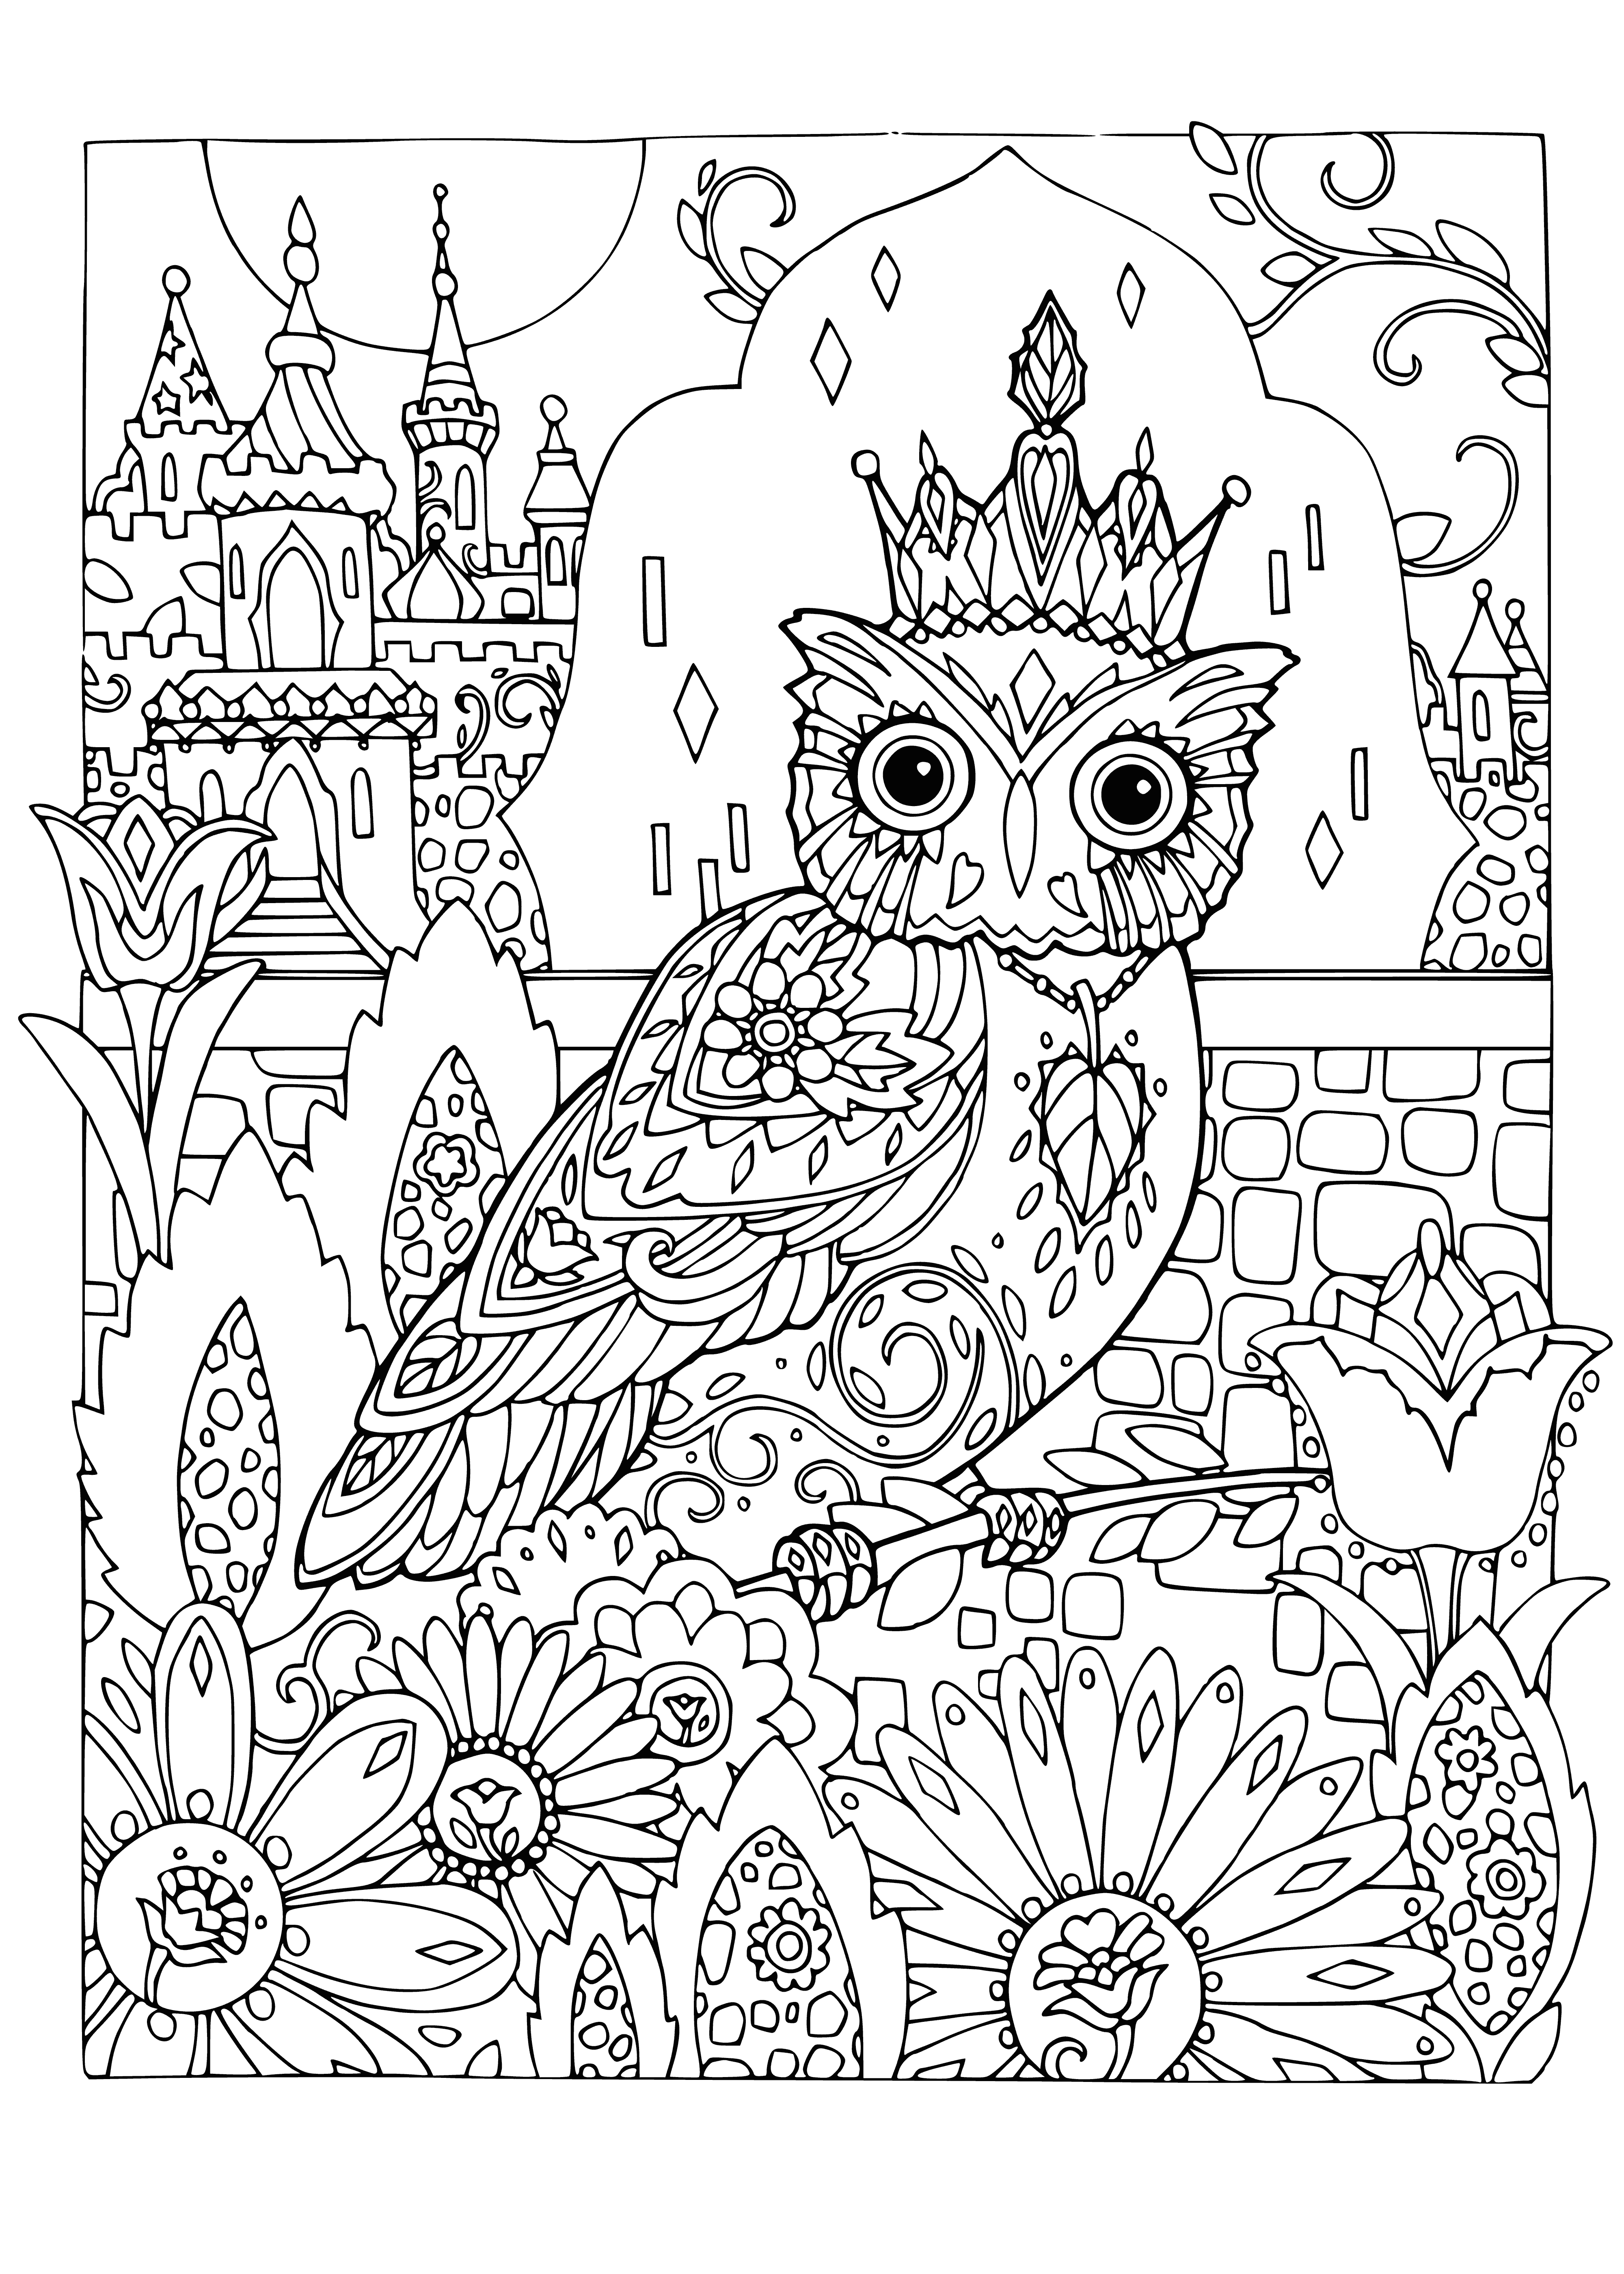 coloring page: Wise owl on house, staring with big eyes and holding mistletoe in claw. Artistic & festive!